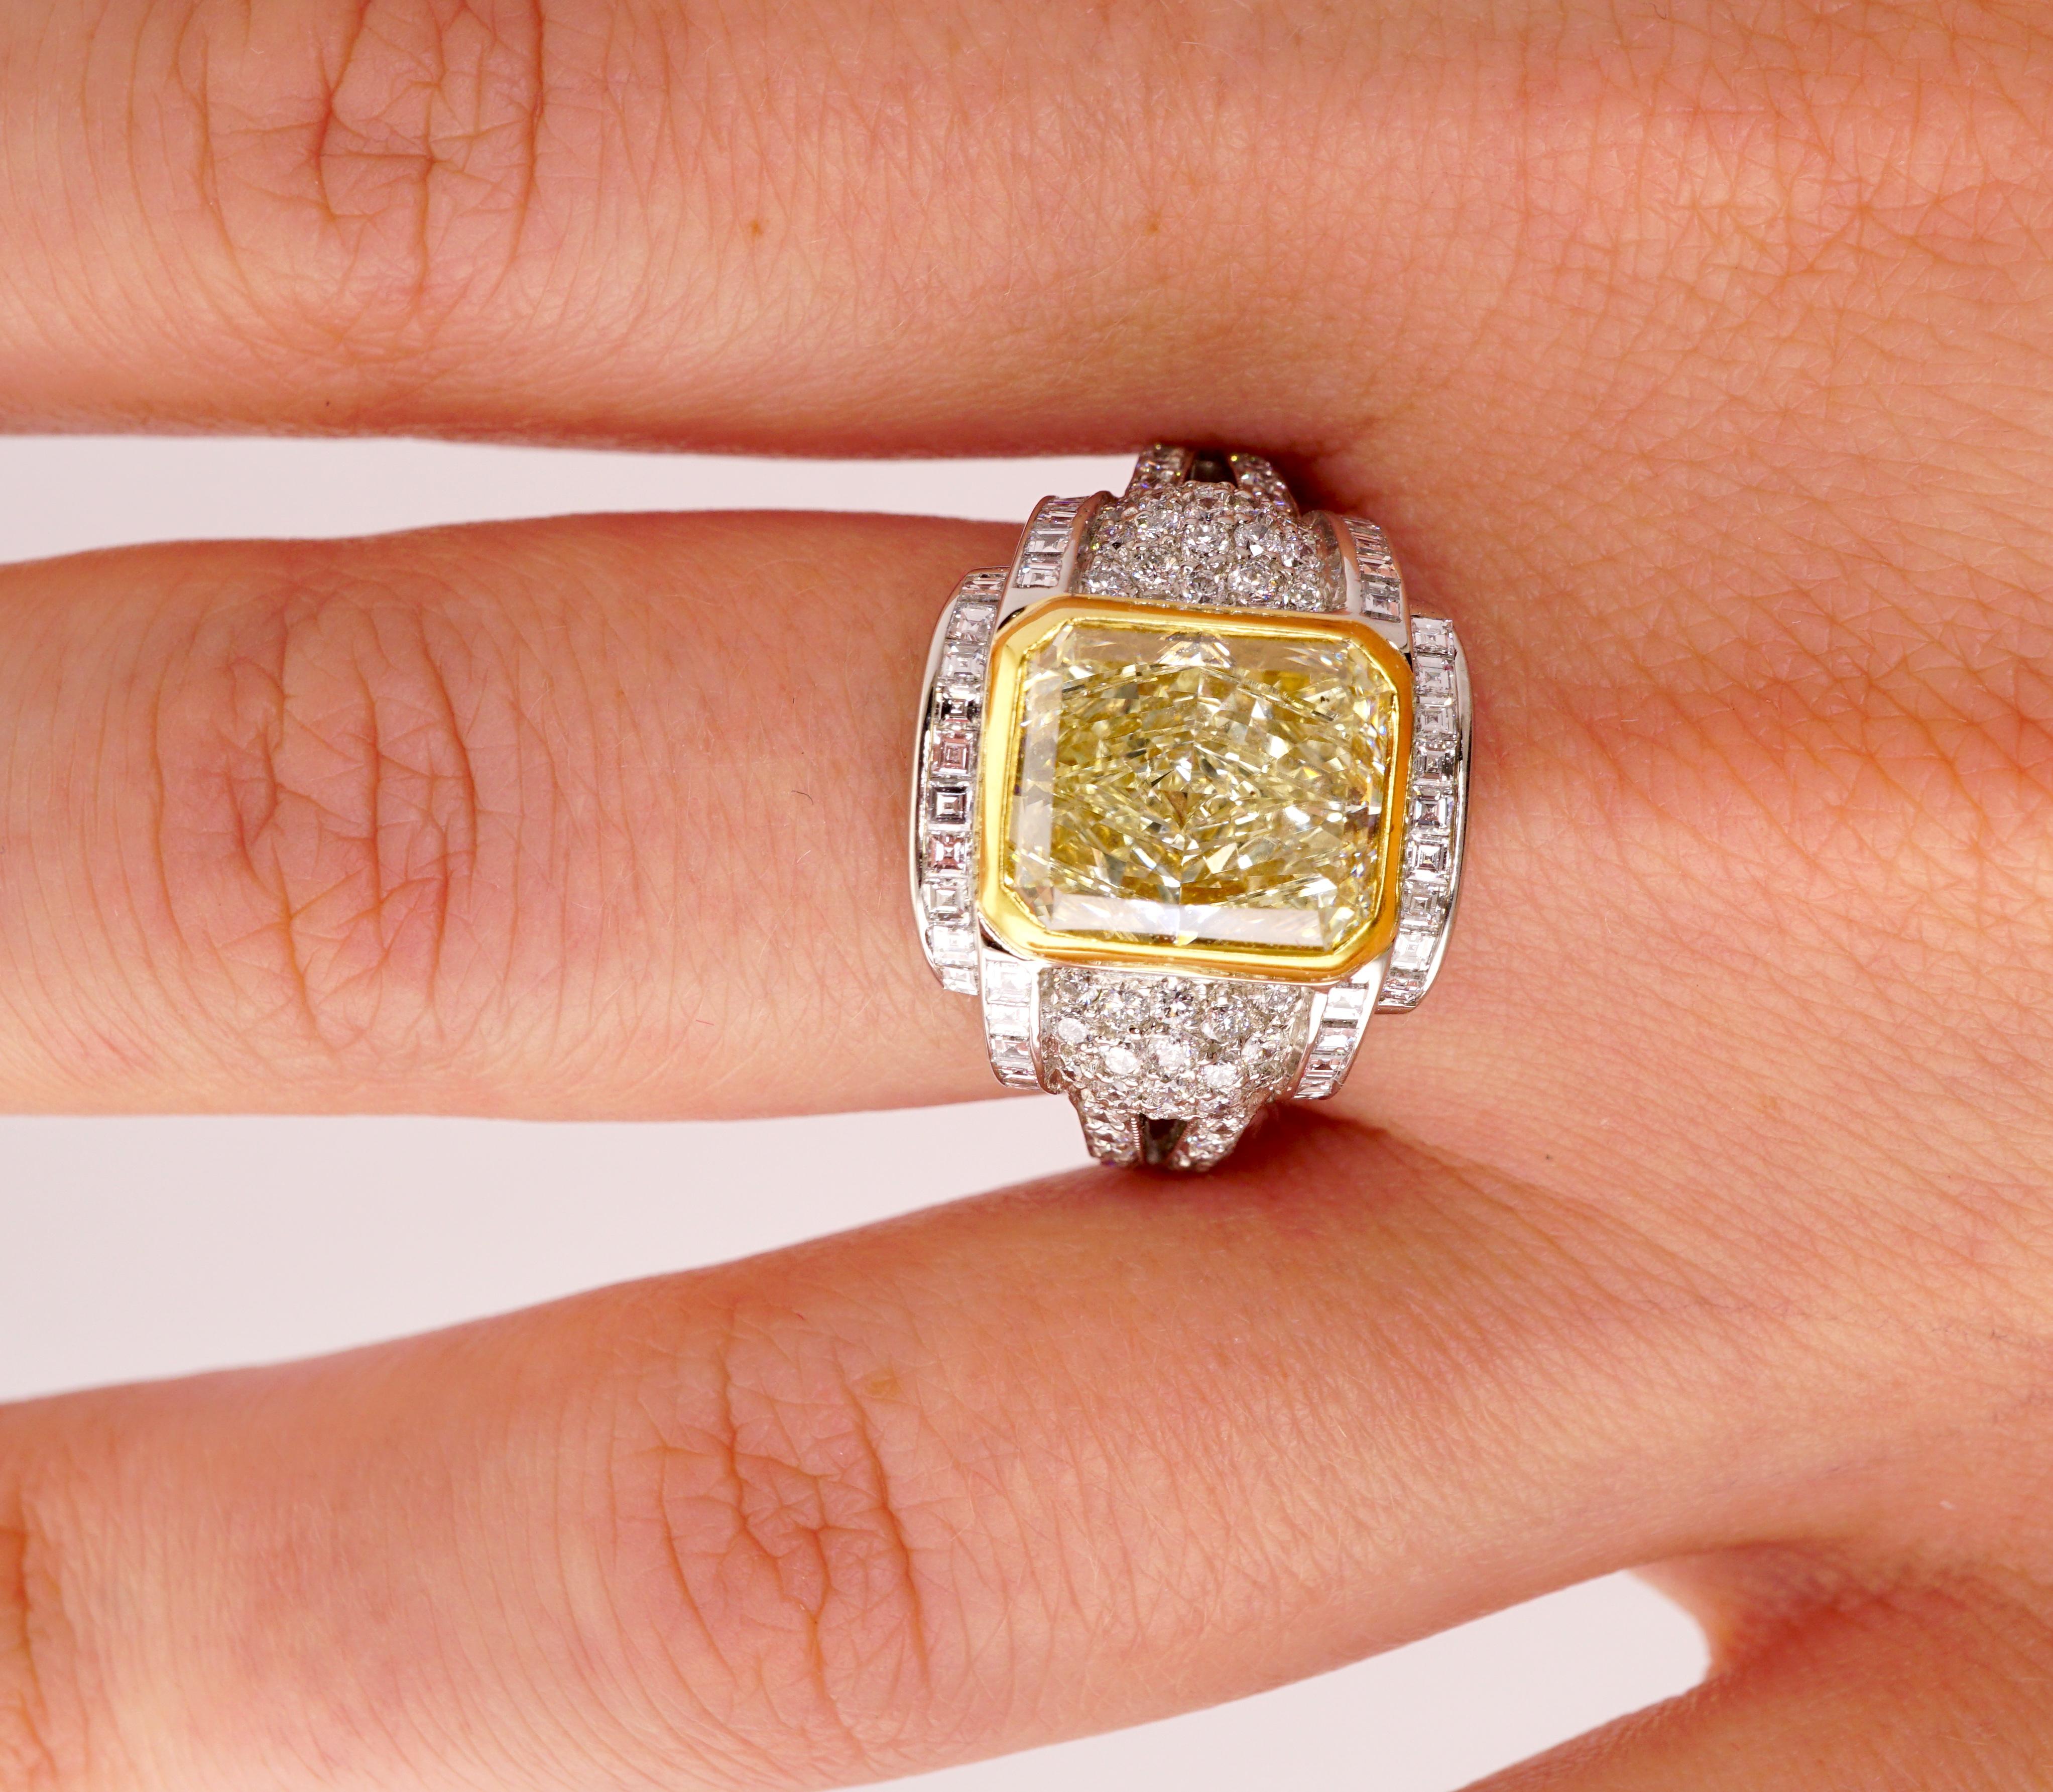 Yellow Diamond ring with EGL certificate, no.400148819D. Center stone: 3.87ct Radiant cut Fancy Yellow VS2 diamond, 9.8 x 8.3 x 4.94mm. Side stones: carre and brilliant round cut diamonds: 1.35ct F-G S1-SI2. Total carat weight: 5.22ct. Metal: